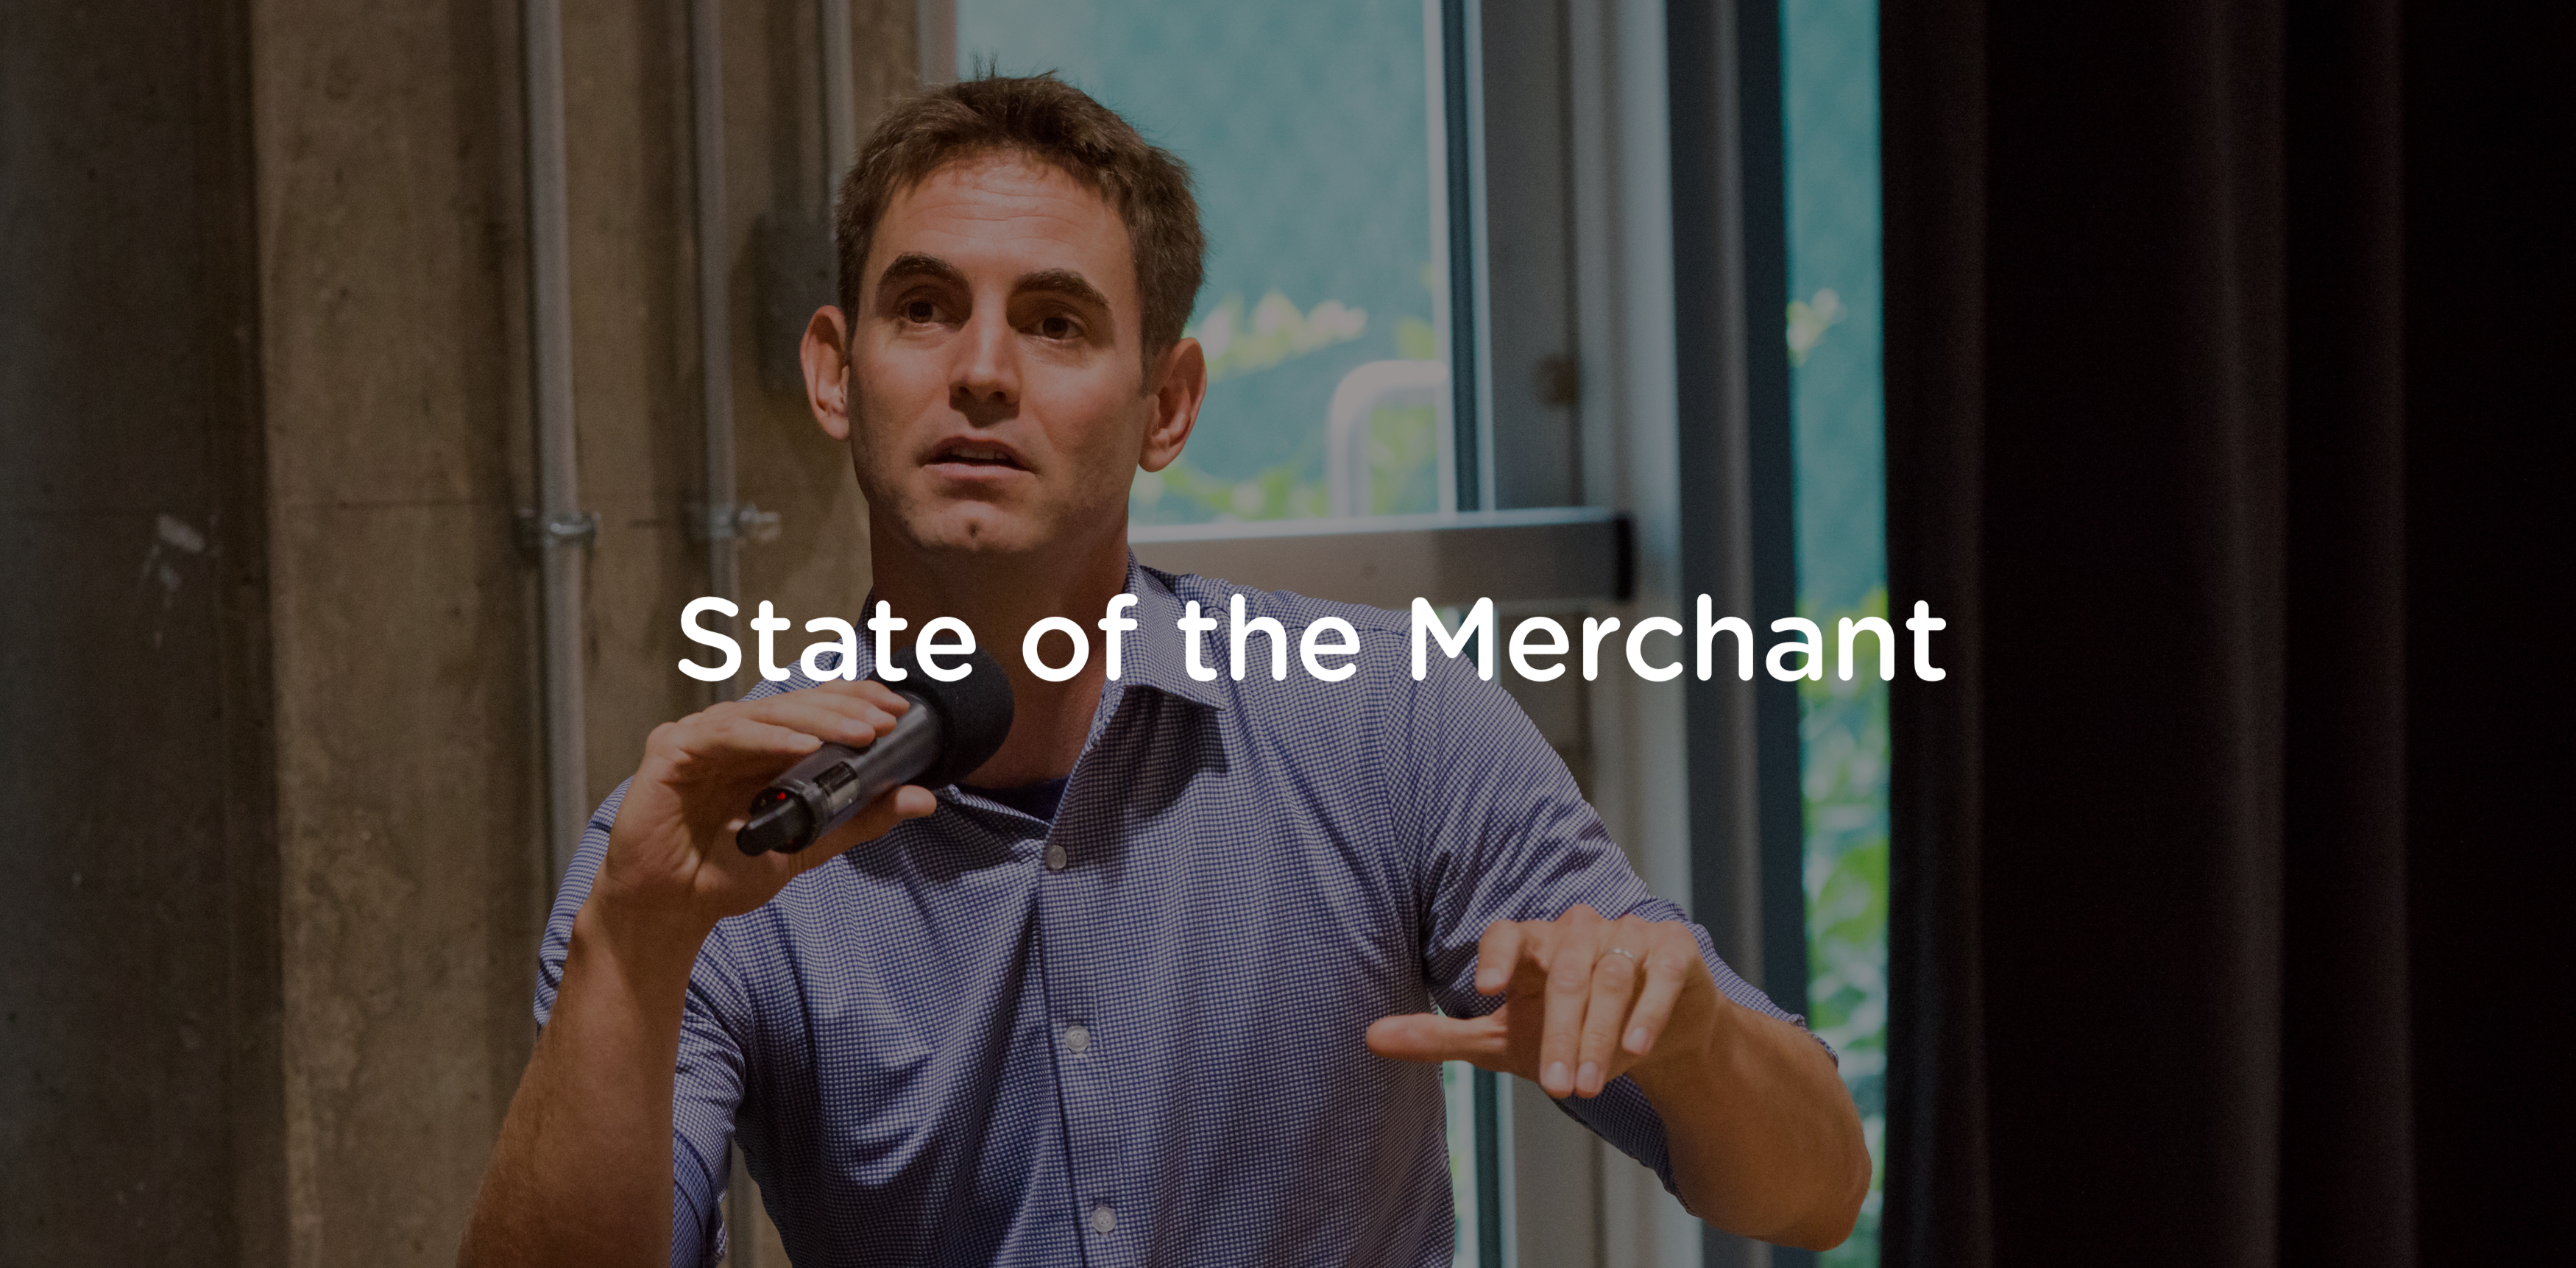 Considerations for eCommerce merchants, with Andrew Youderian of eCommerce Fuel